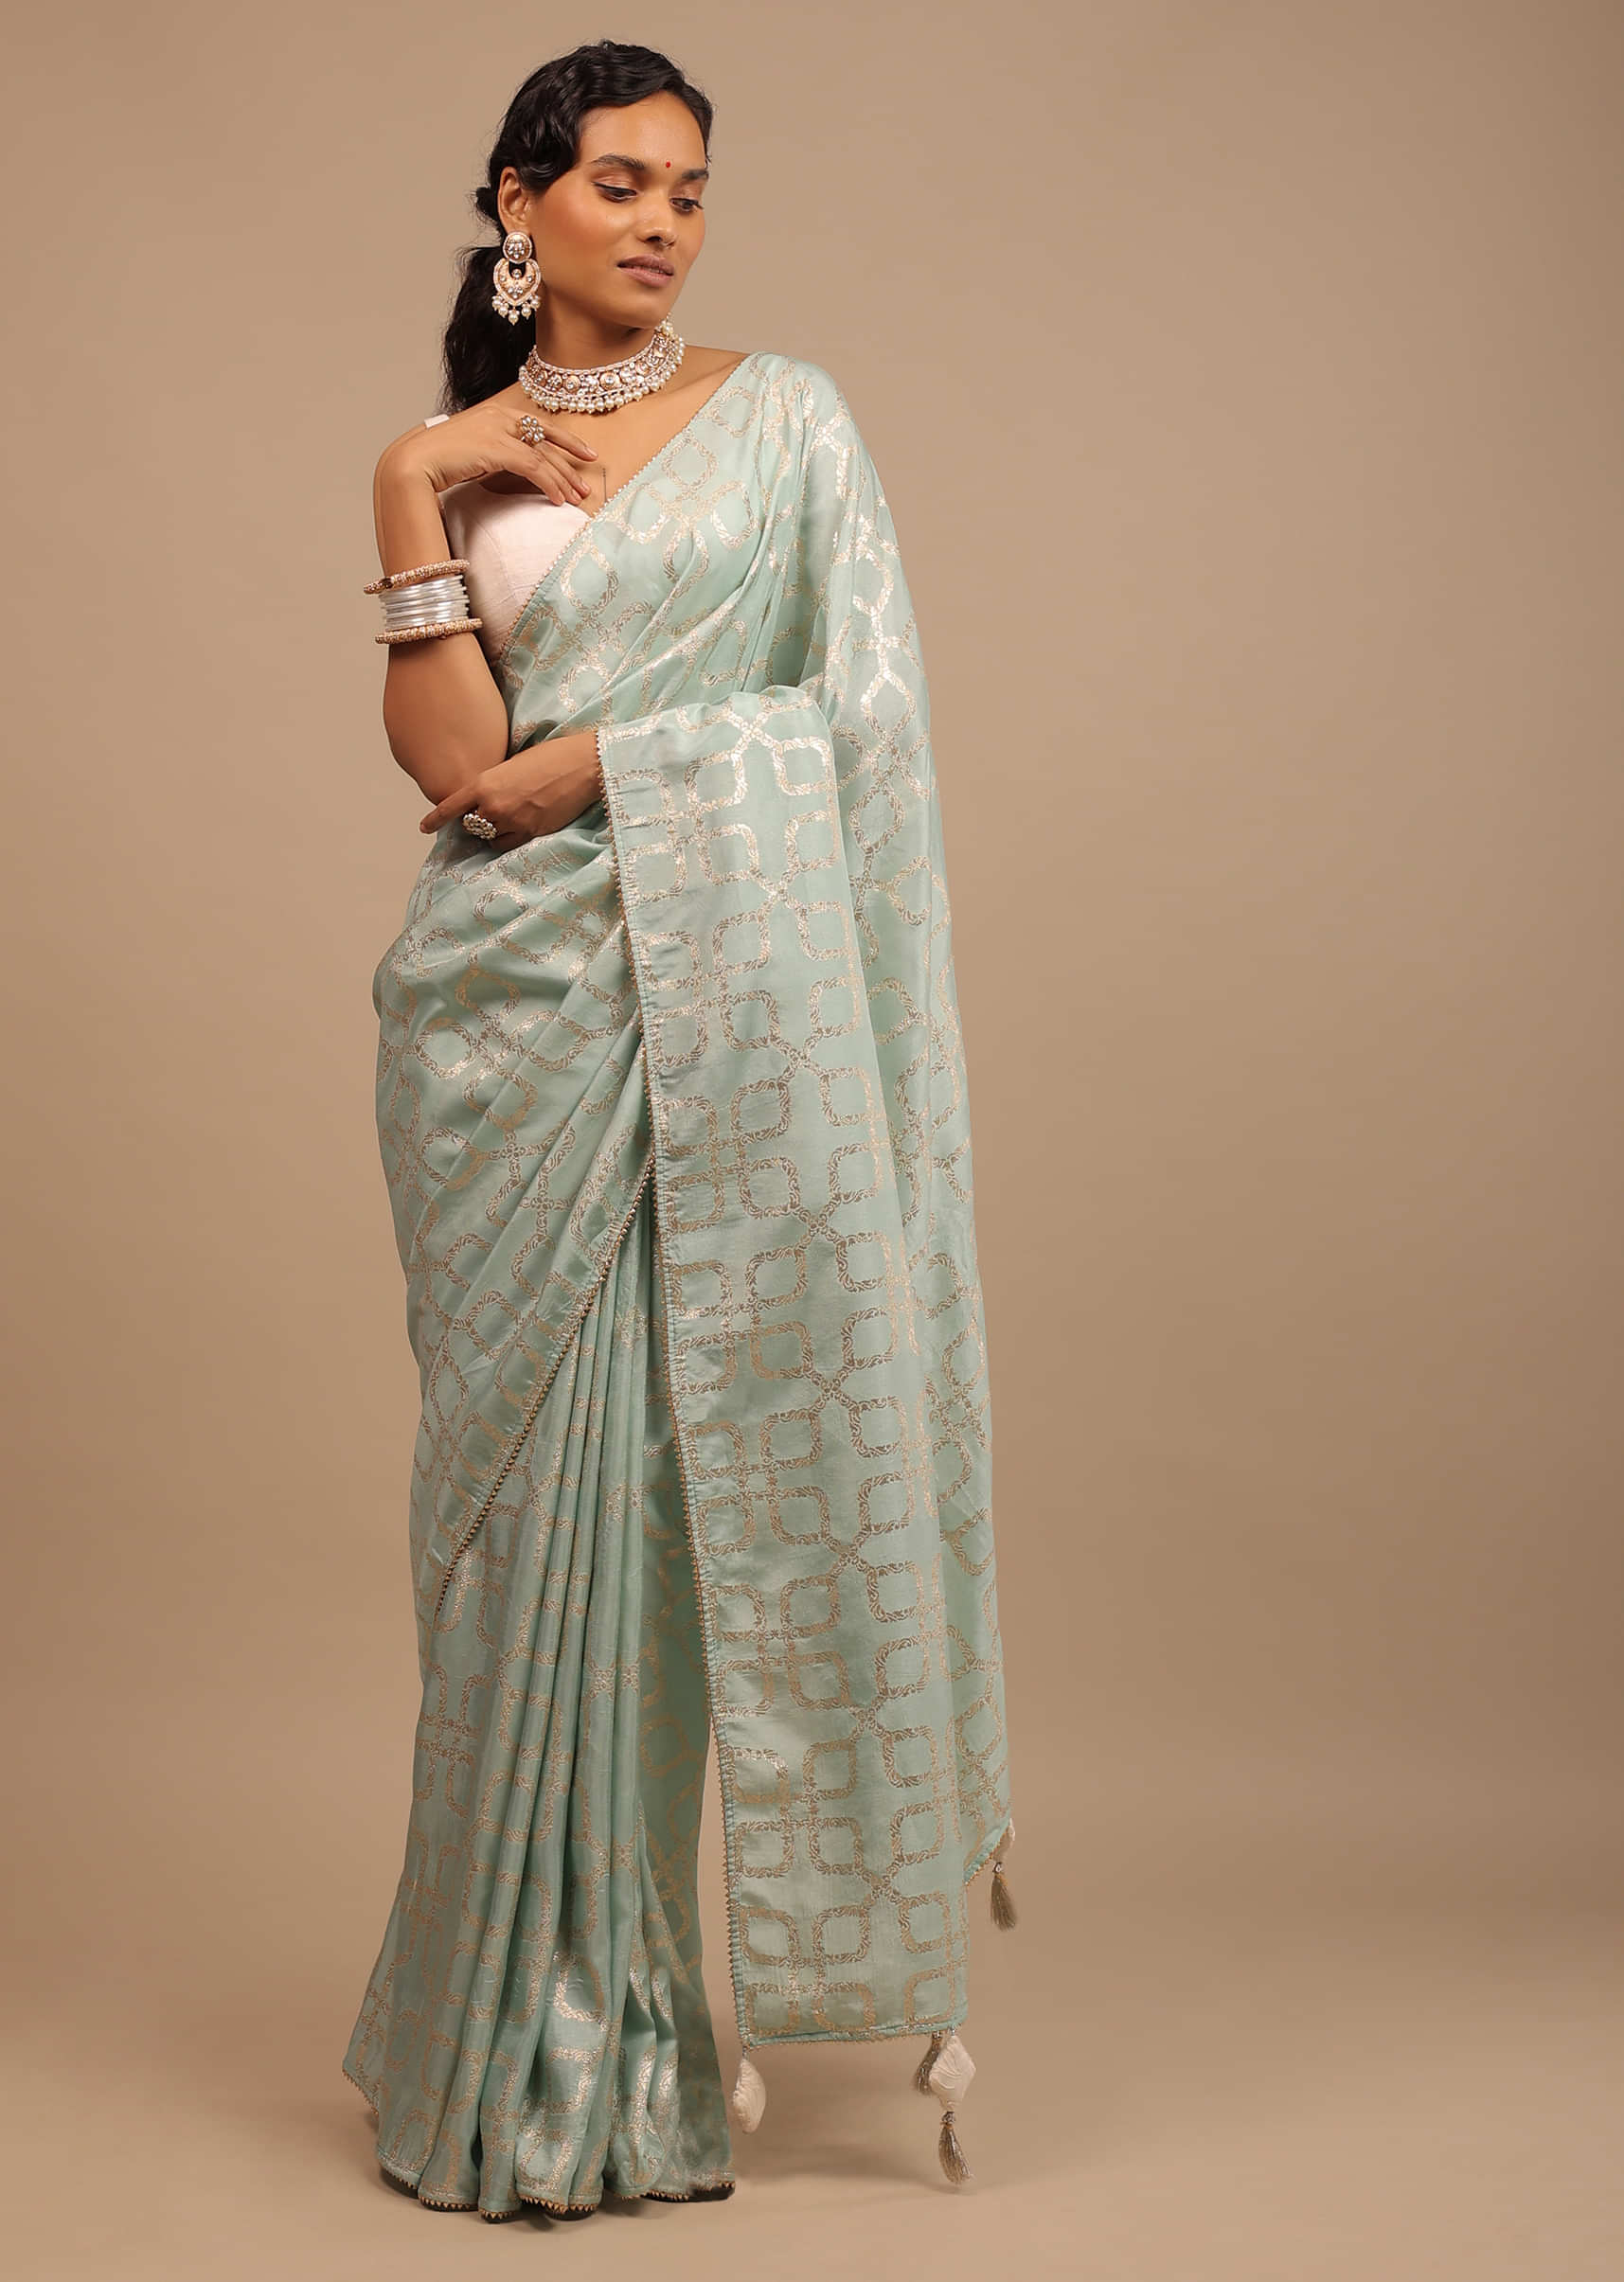 Powder Blue Saree In Dola Silk With Lurex Woven Geometric Jaal And Unstitched Lucknowi Blouse